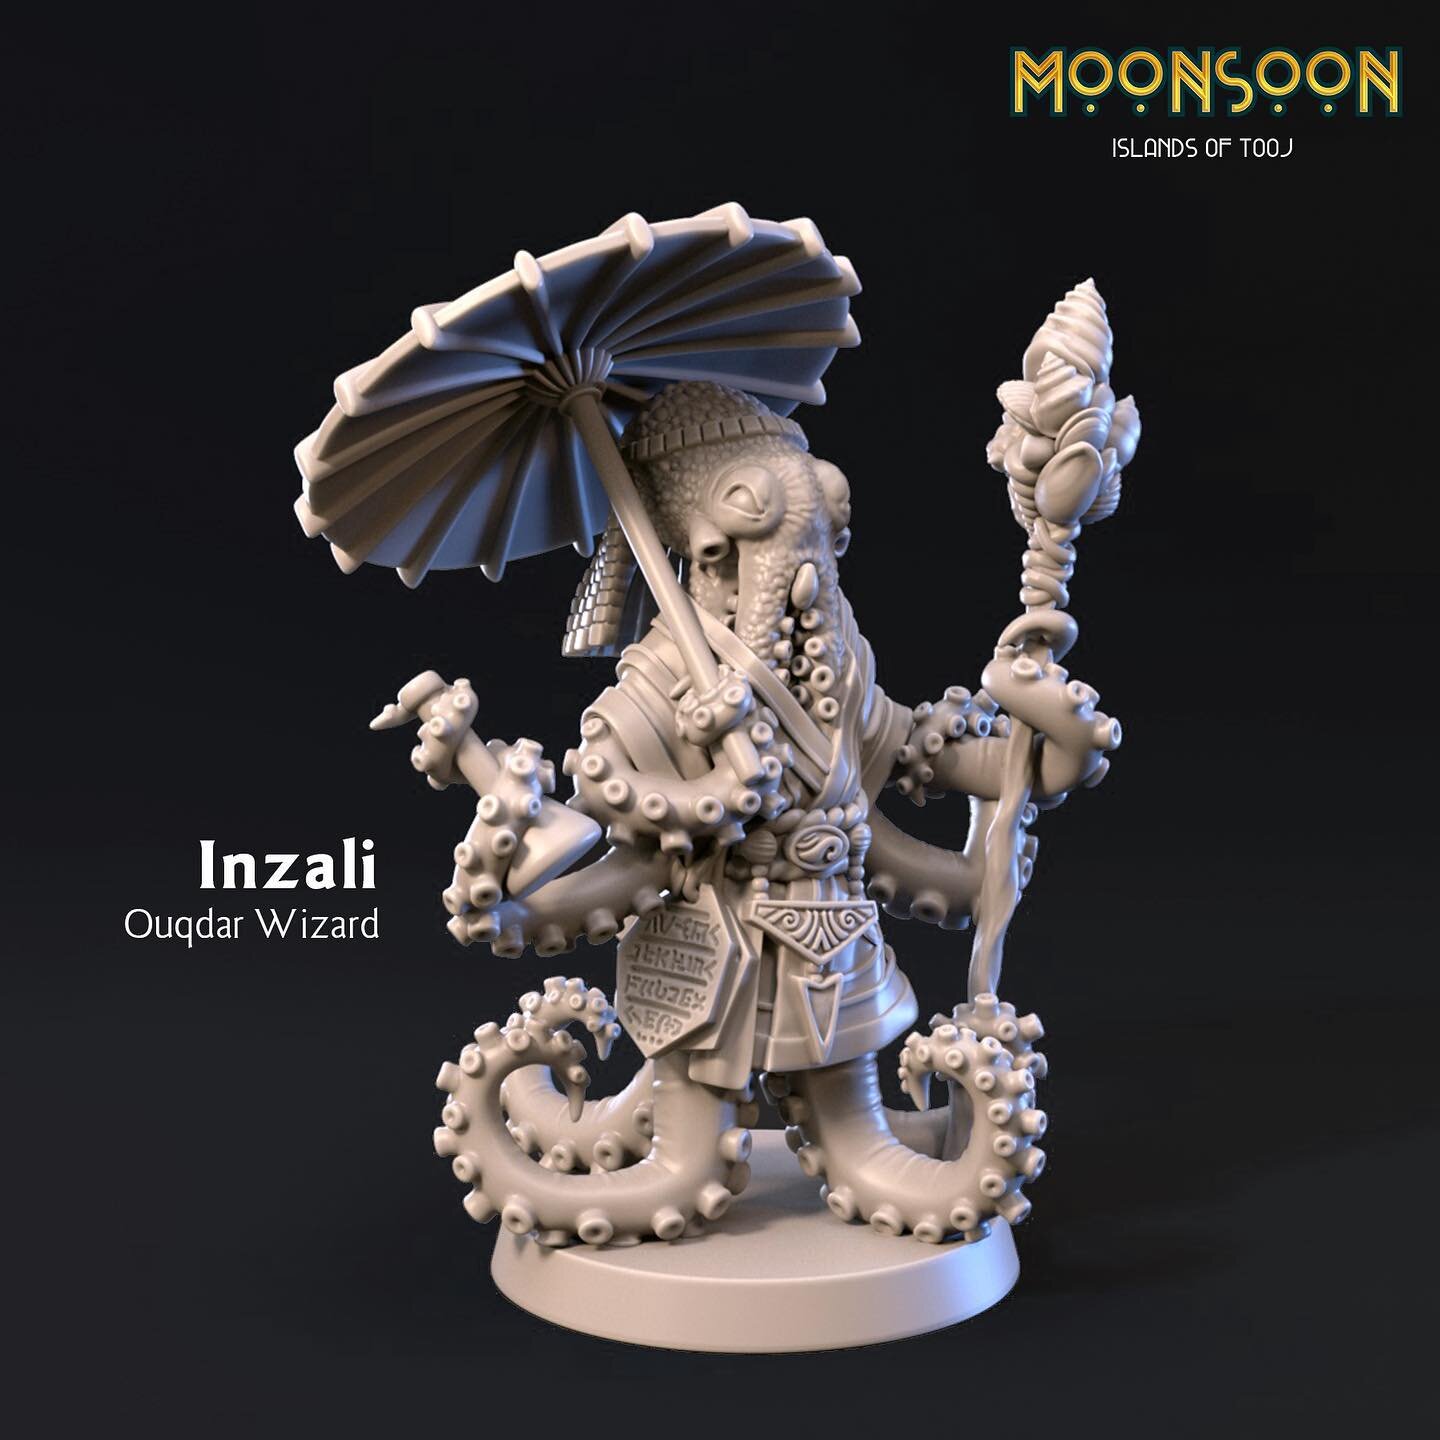 She&rsquo;s here! Sculpted by @zegolem into the 3D world. Meet Inzali, the colorful moon gazer Ouqdar with her little umbrella. 🤗🤗

She will be available to play in the starter campaign as a pre-made iconic character in Moonsoon: Islands of Tooj. 
